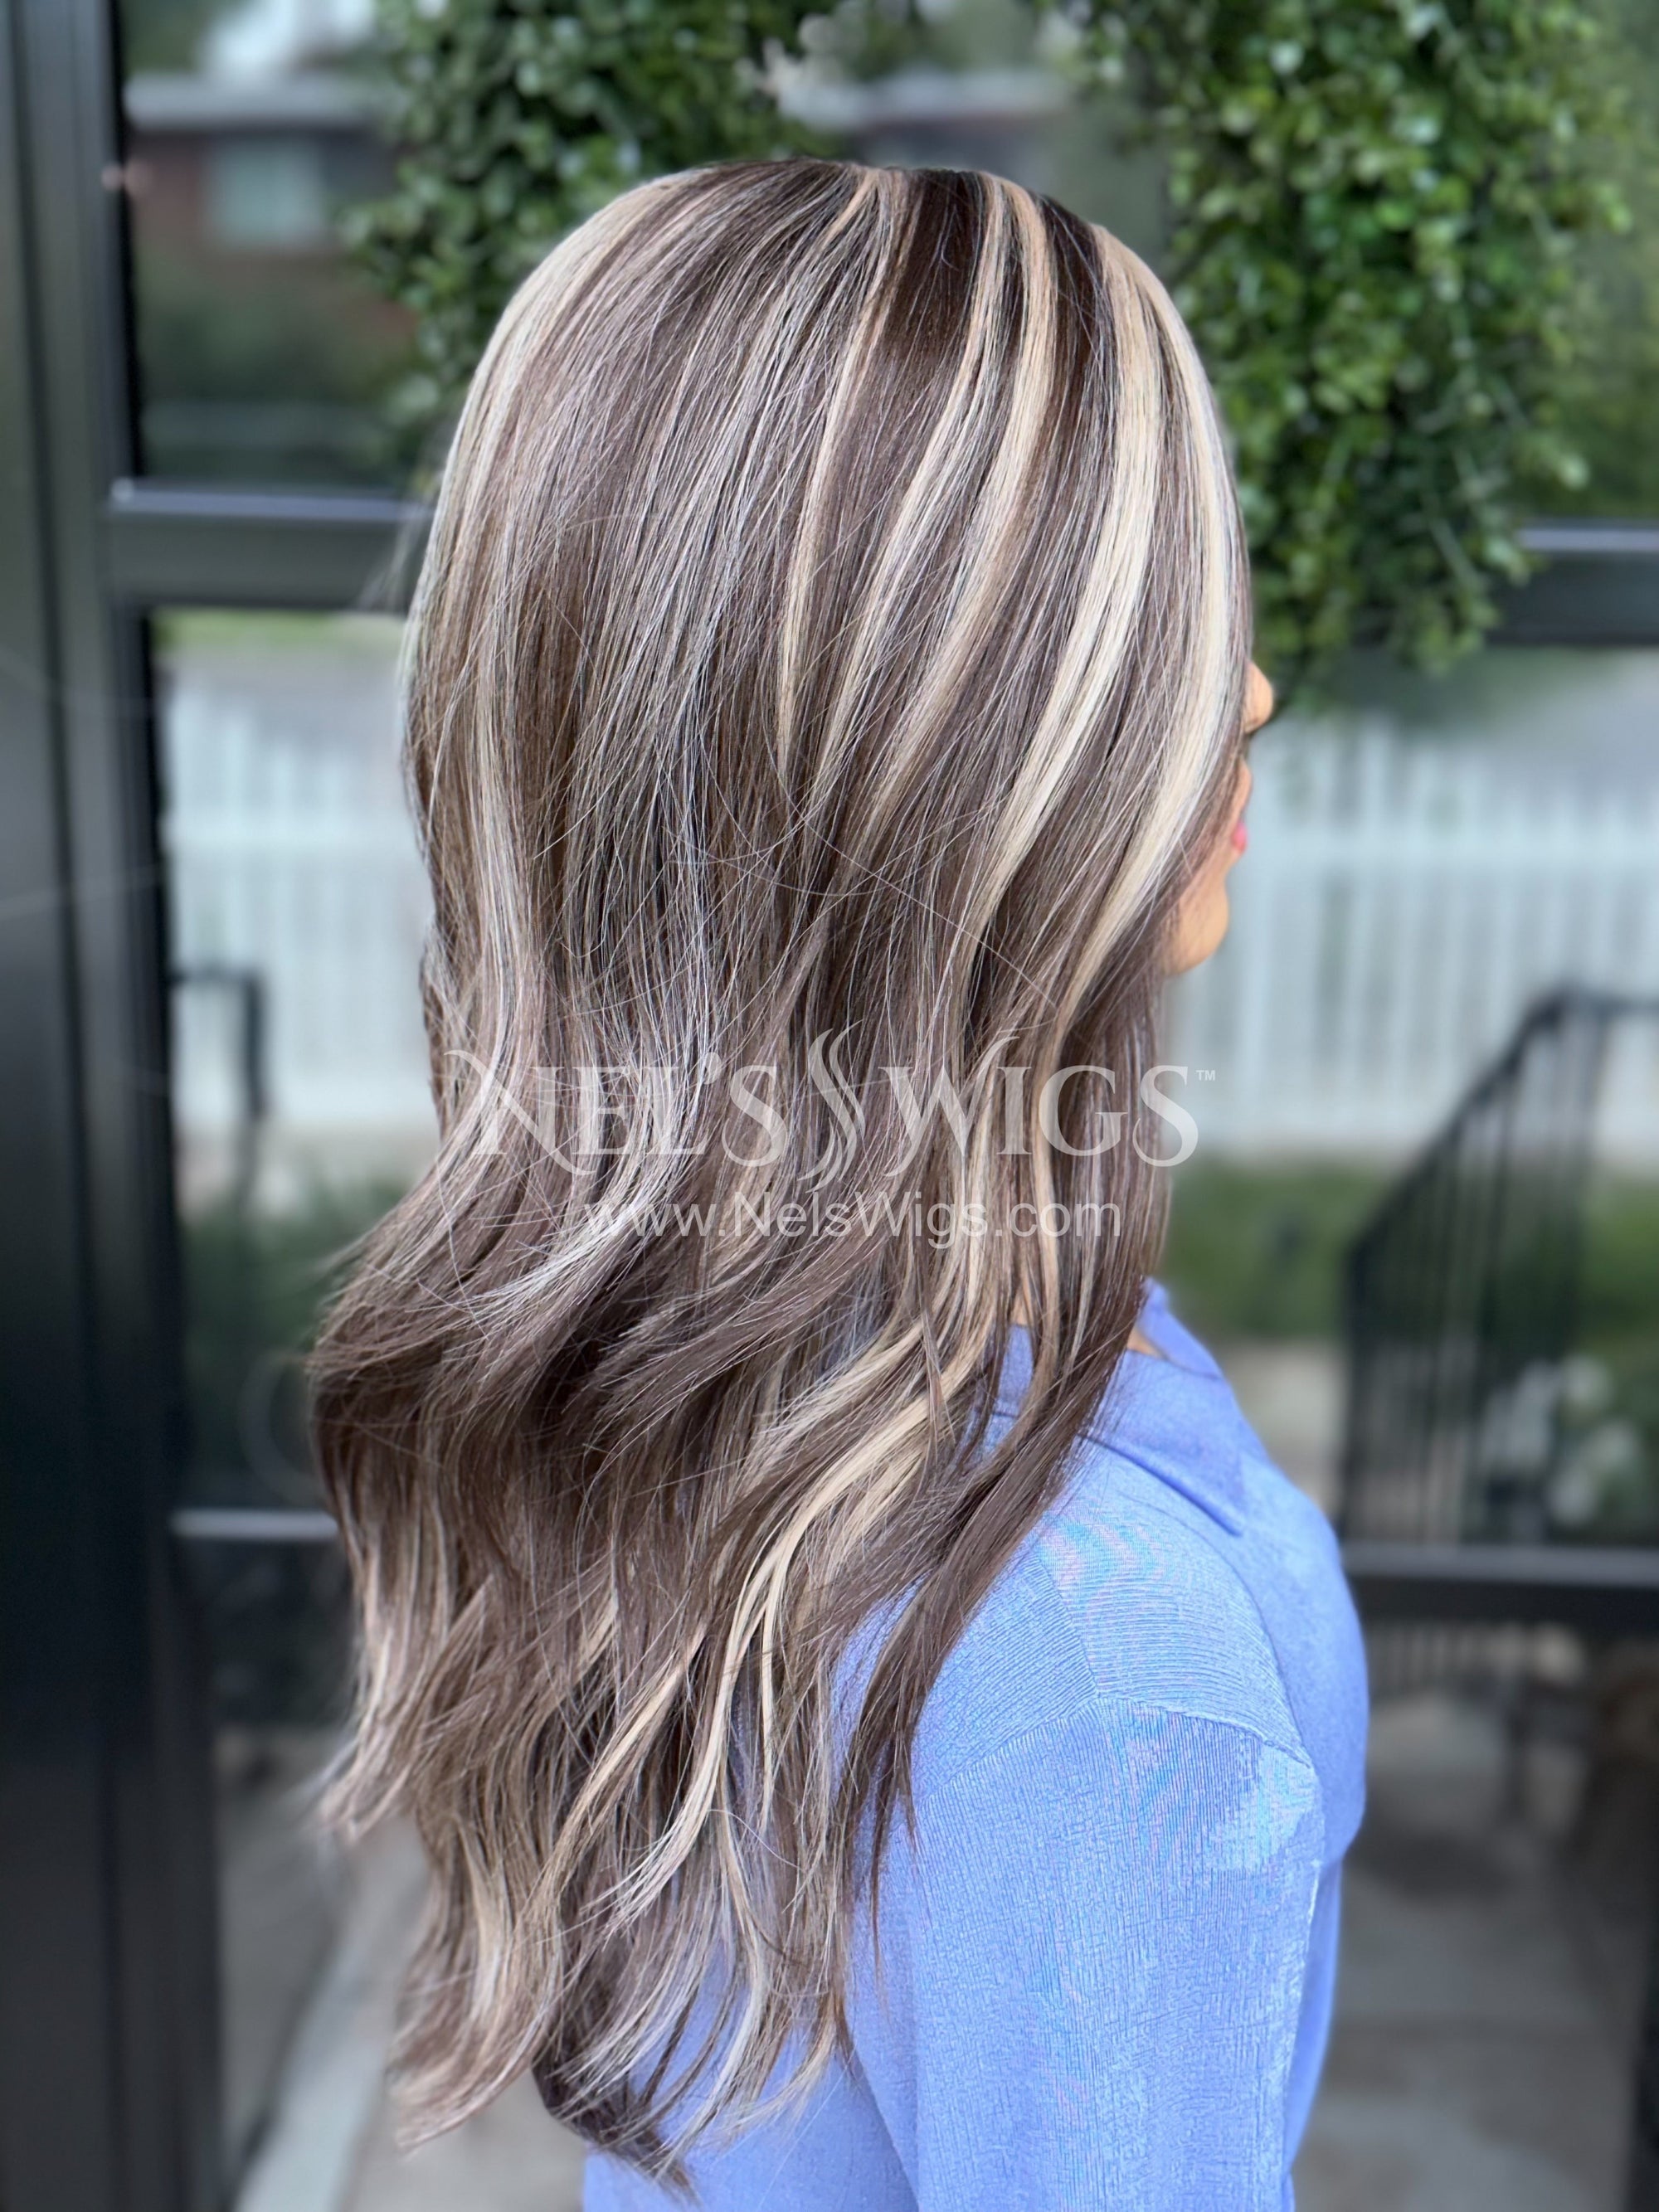 Bella - Ligfht Brinette with Highlights